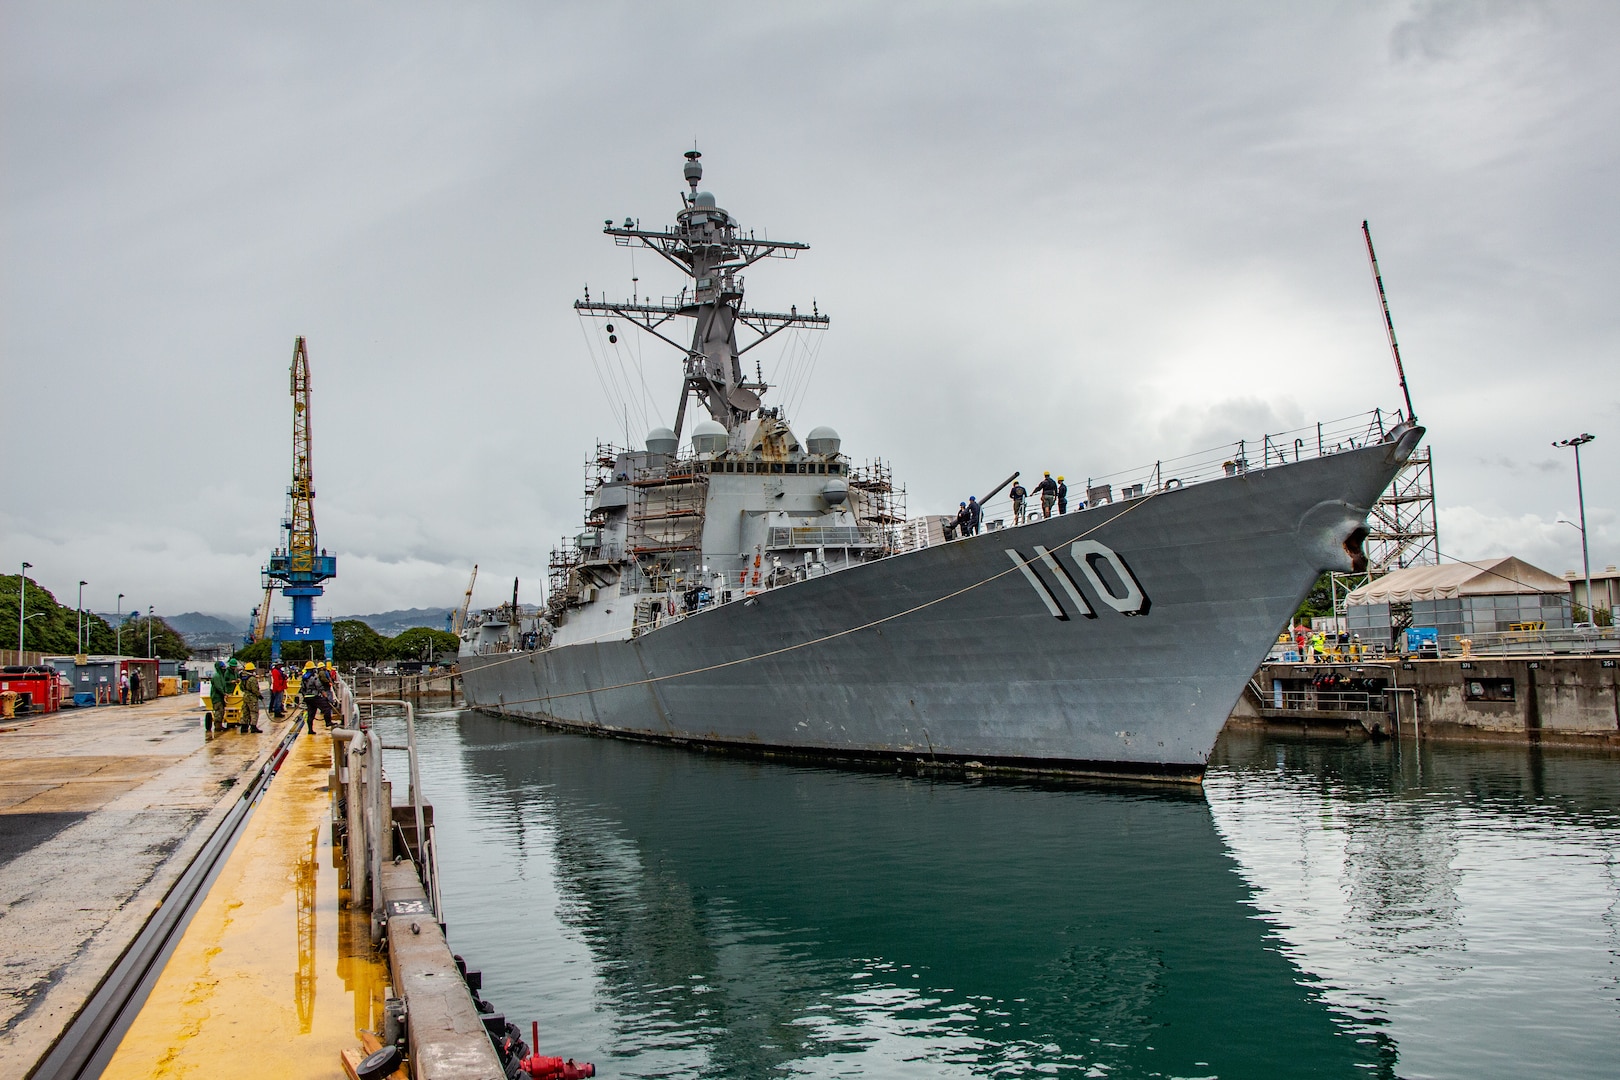 USS William P Lawrence (DDG 110) docks in Dry Dock #4 at Pearl Harbor Naval Shipyard & IMF on March 9.